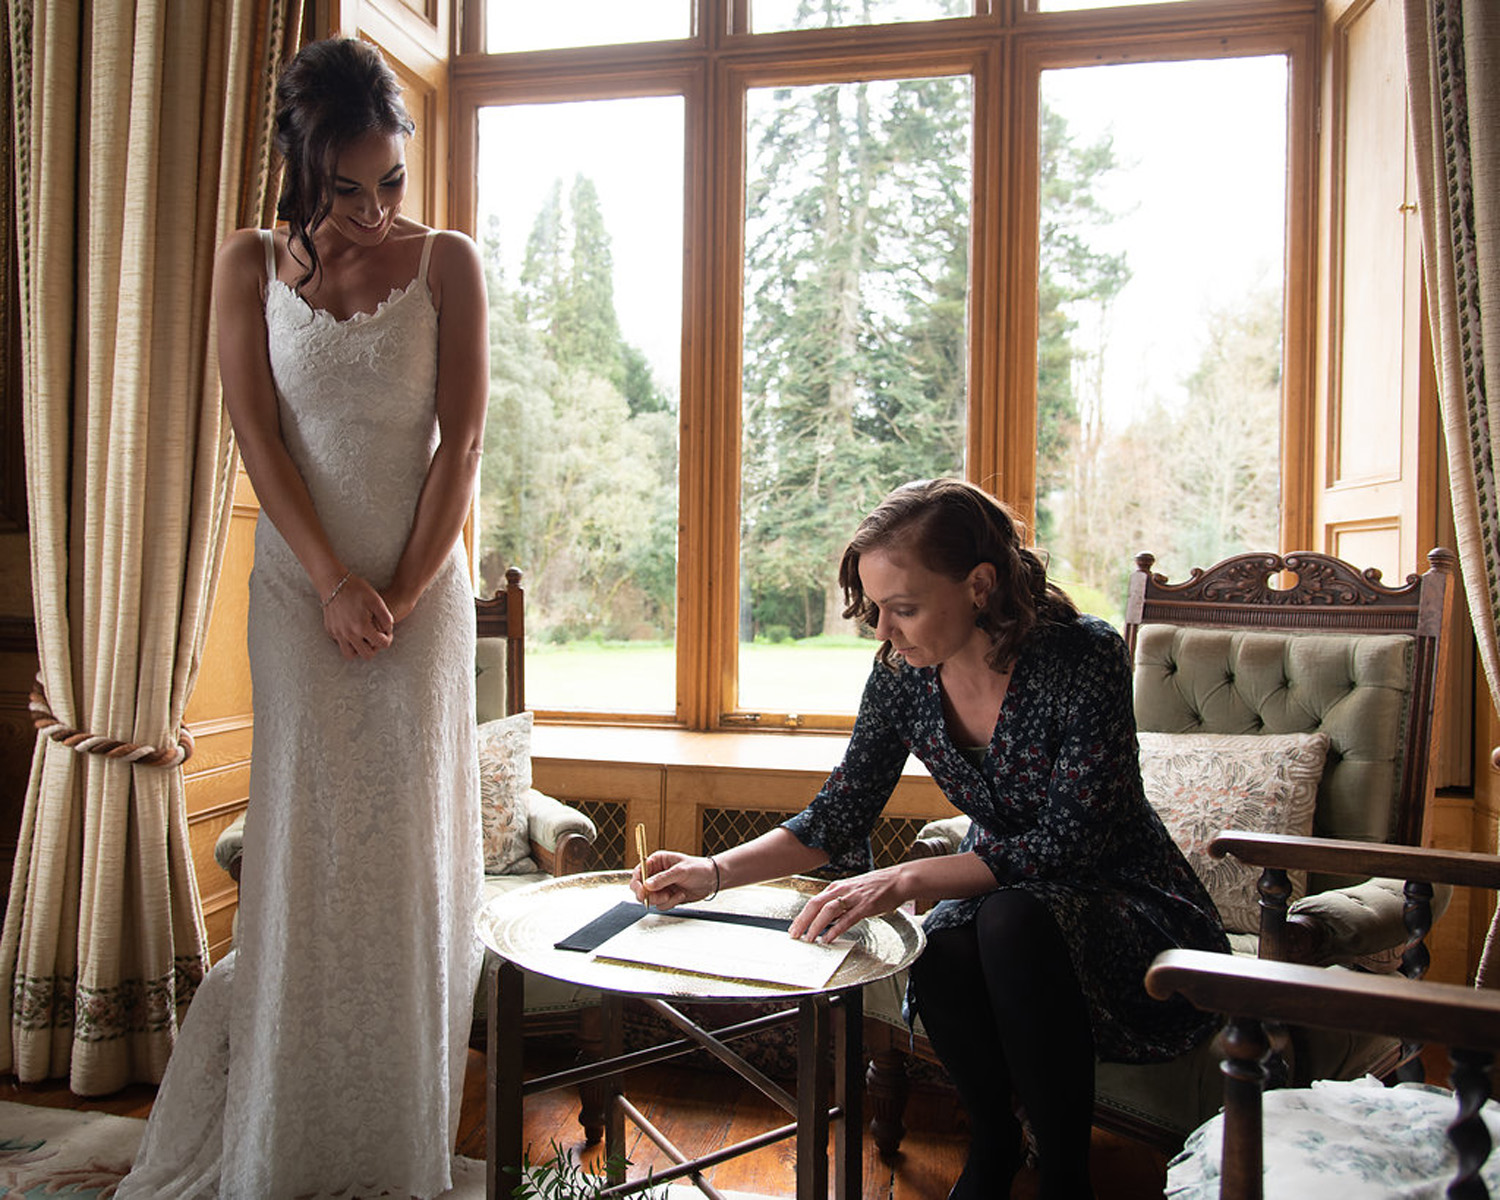 manor house elopement signing the register elope to ireland